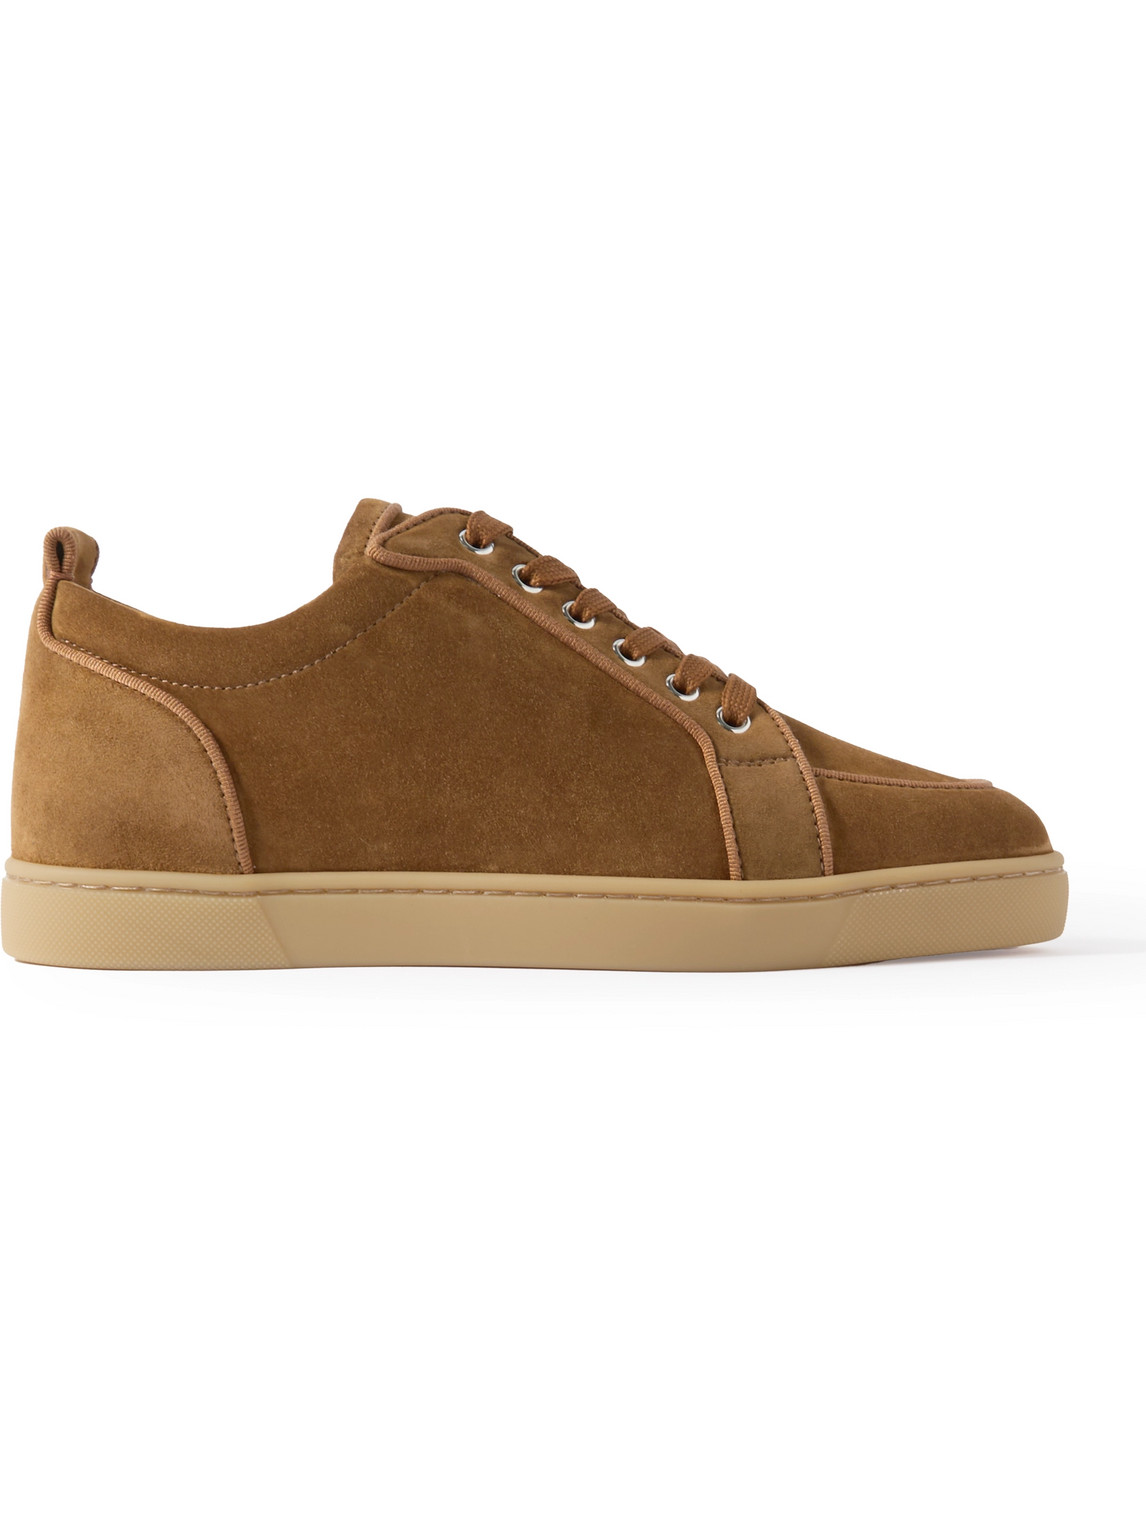 Christian Louboutin Rantulow Suede Trainers In Brown